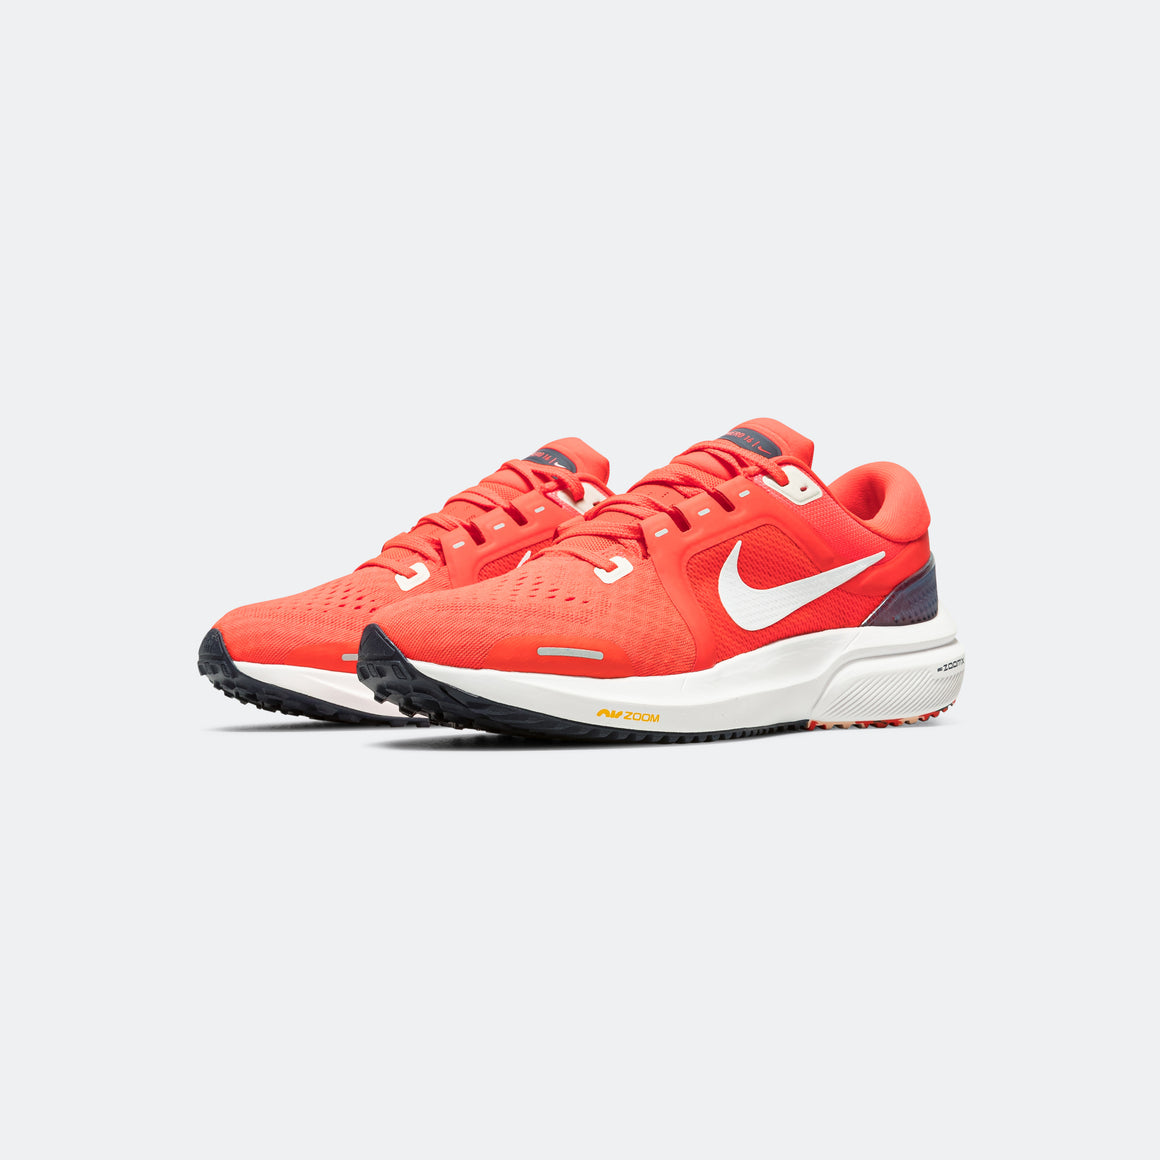 Nike - Mens Air Zoom Vomero 16 - Bright Crimson/White-Obsidian - Up There Athletics